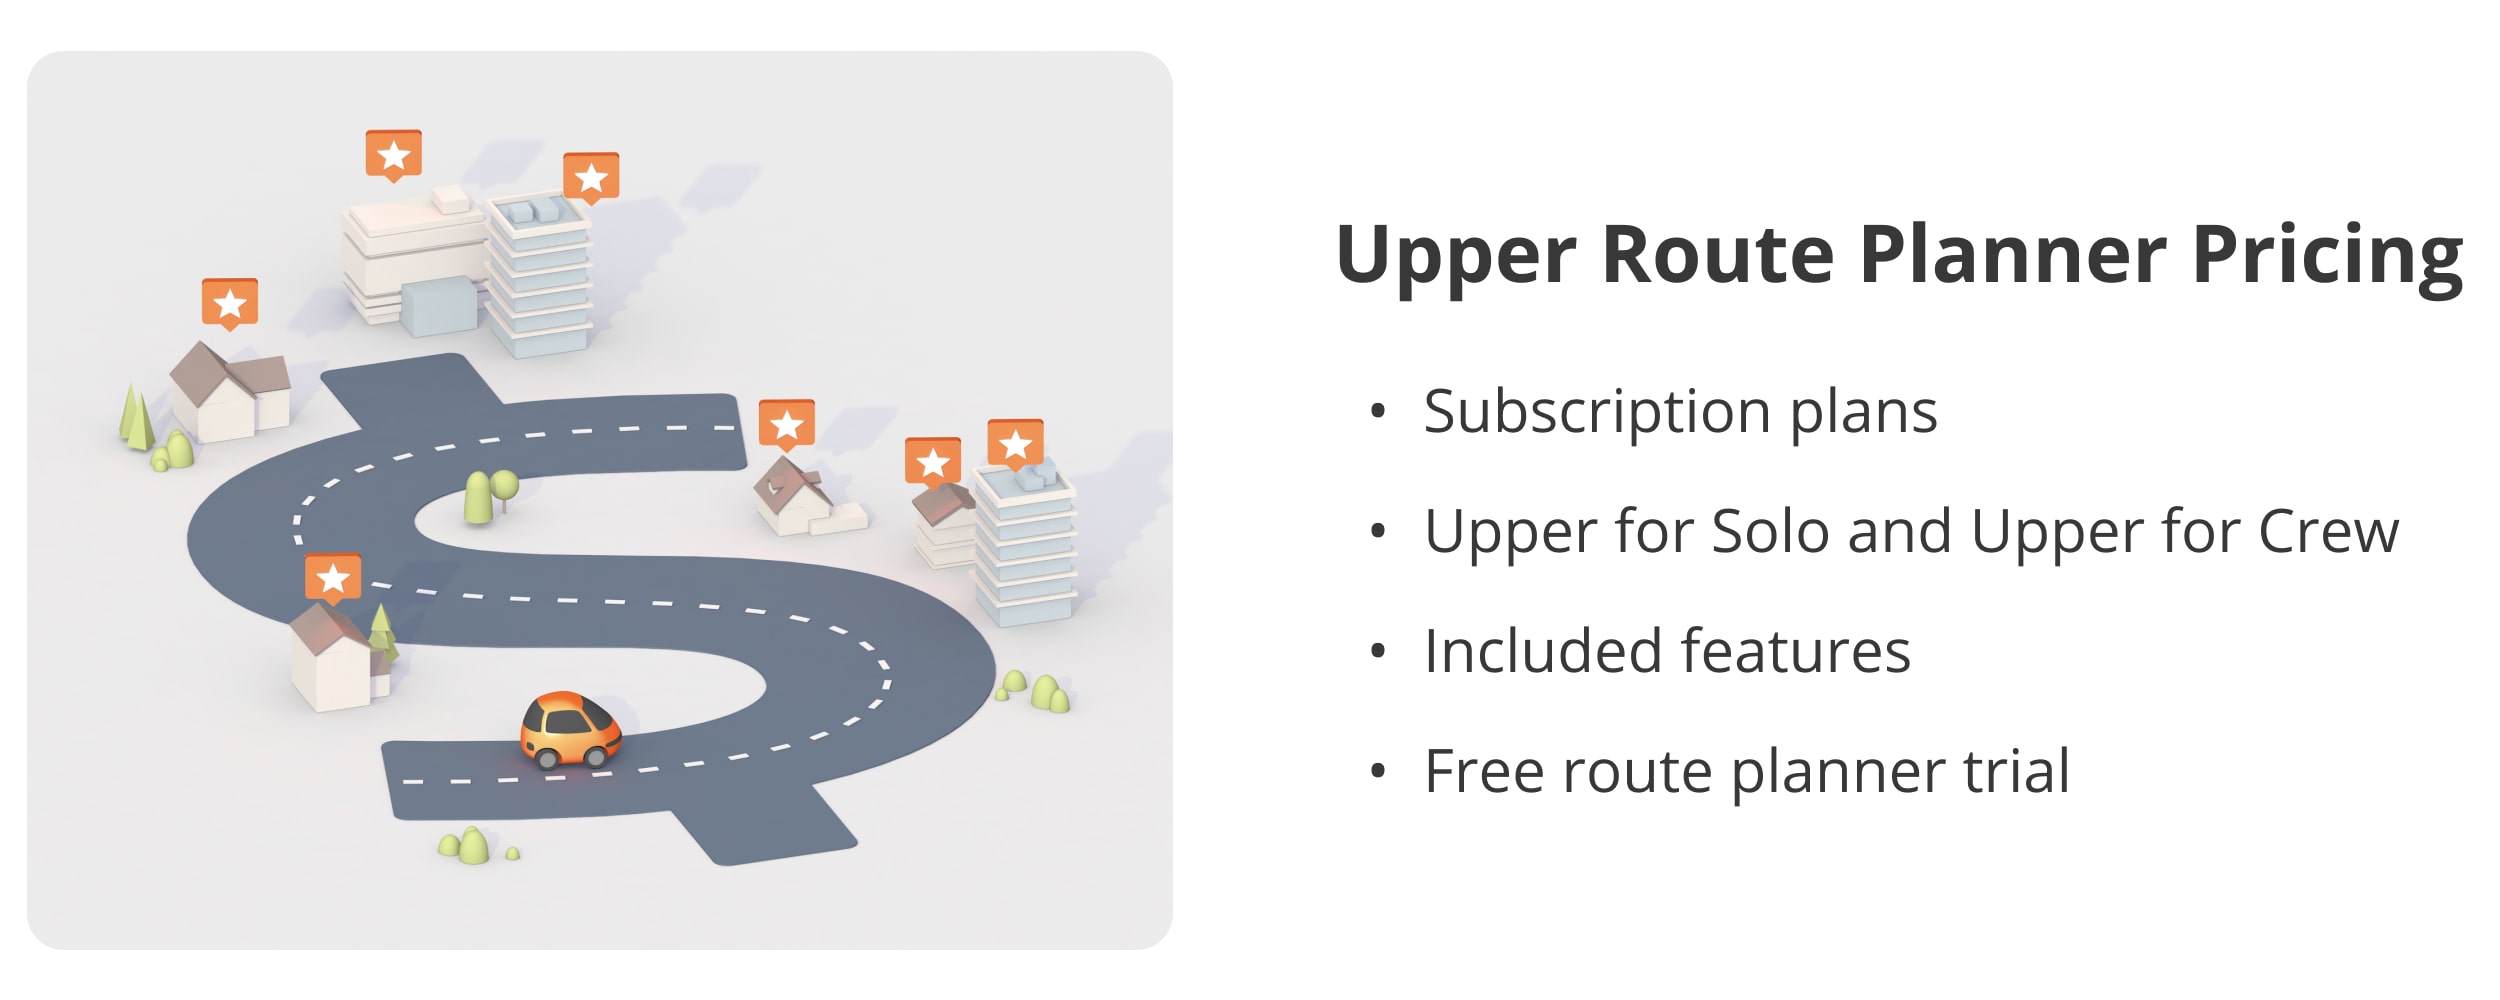 Upper Route Planner pricing, subscription plans, features, Upper for Solo and Upper for Crew.